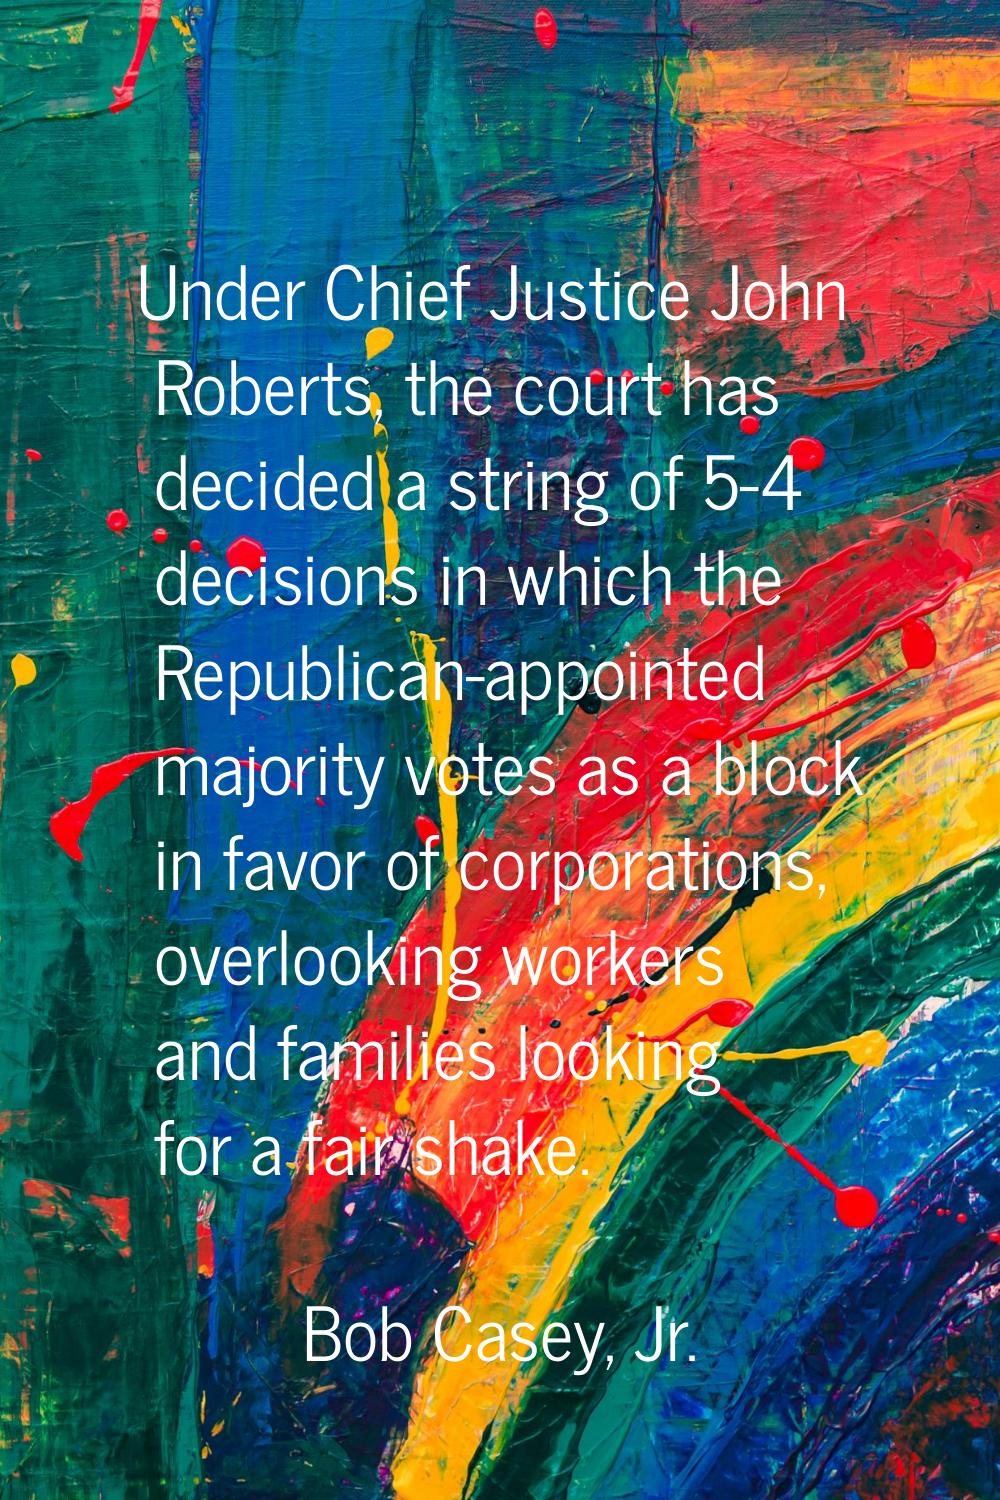 Under Chief Justice John Roberts, the court has decided a string of 5-4 decisions in which the Repu